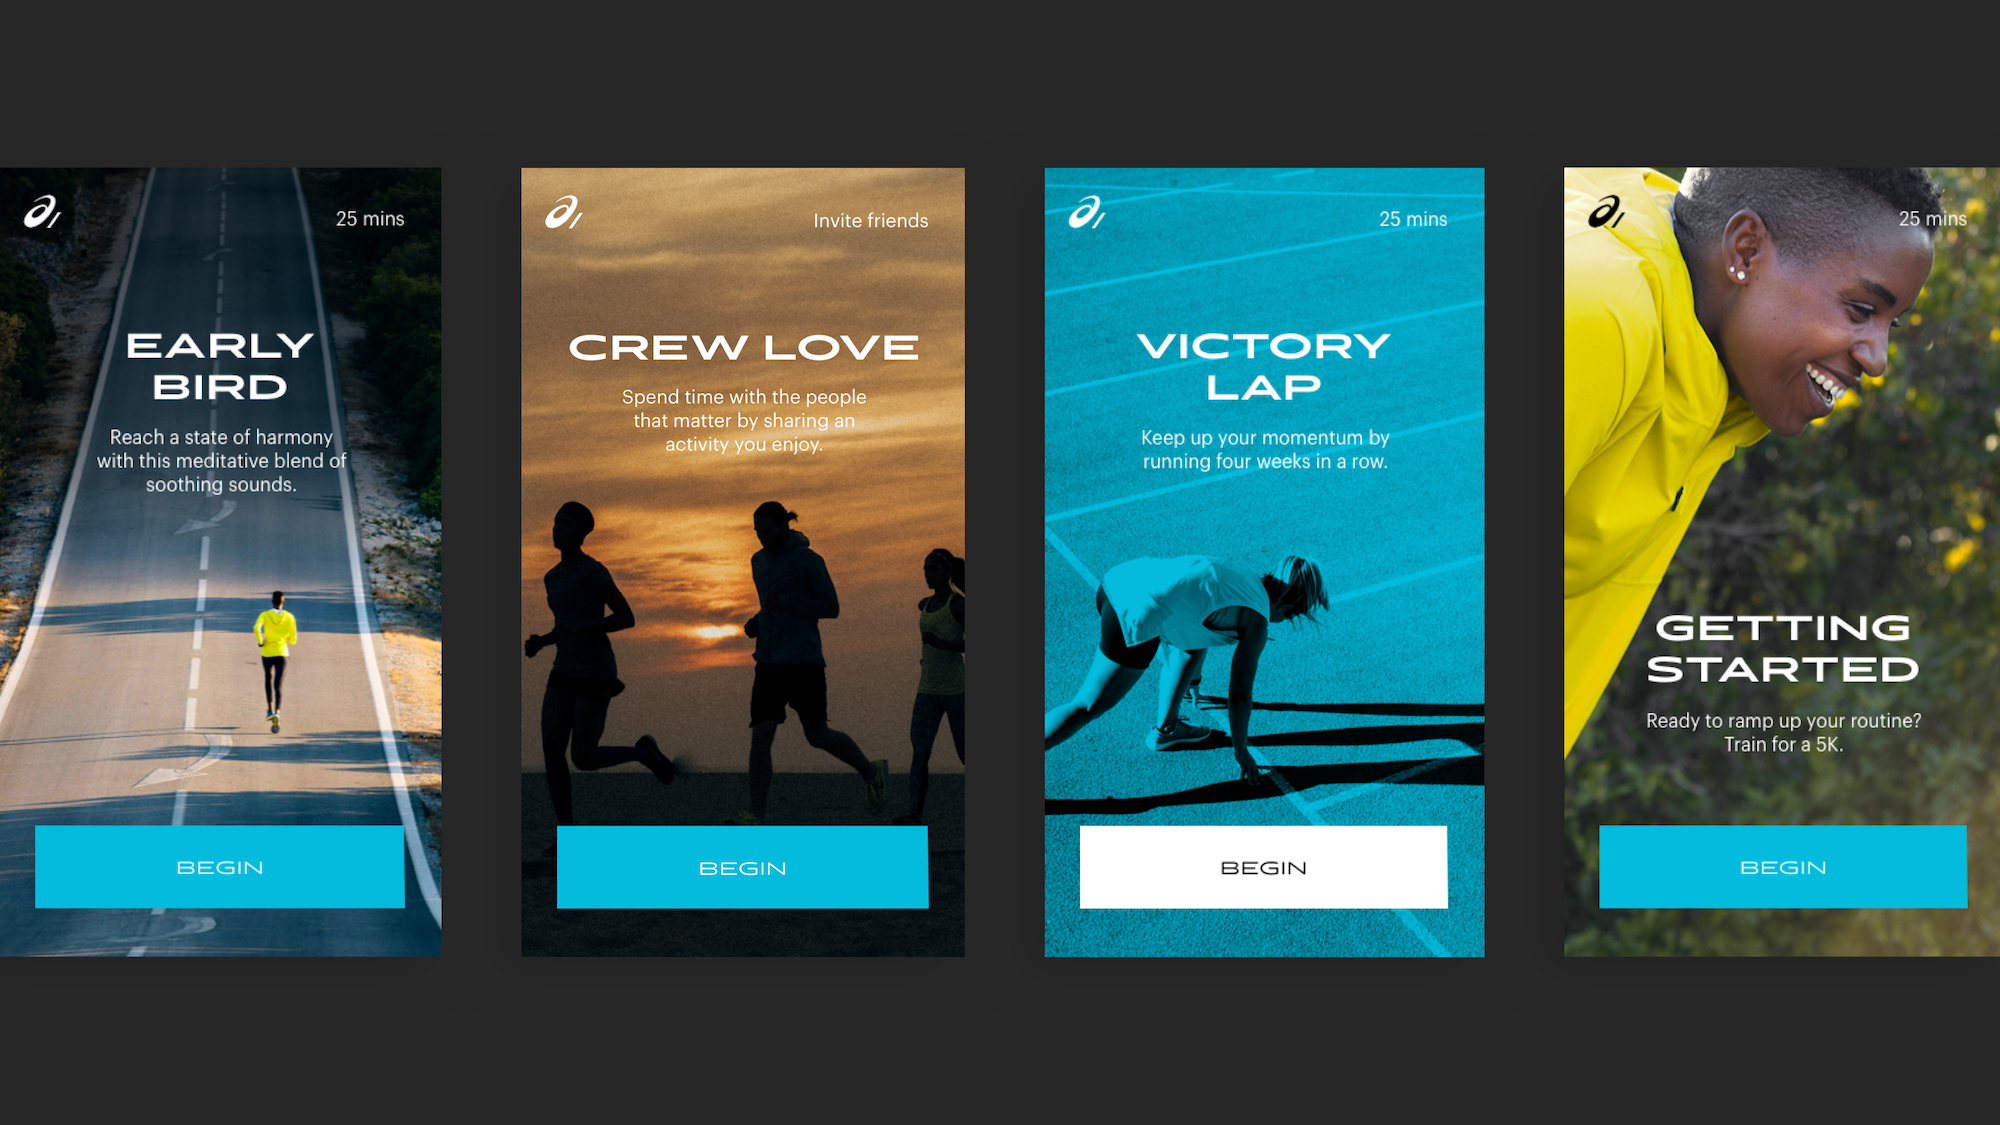 App Starting Screens - Early Bird, Crew Love, Victory Lap, Getting Started